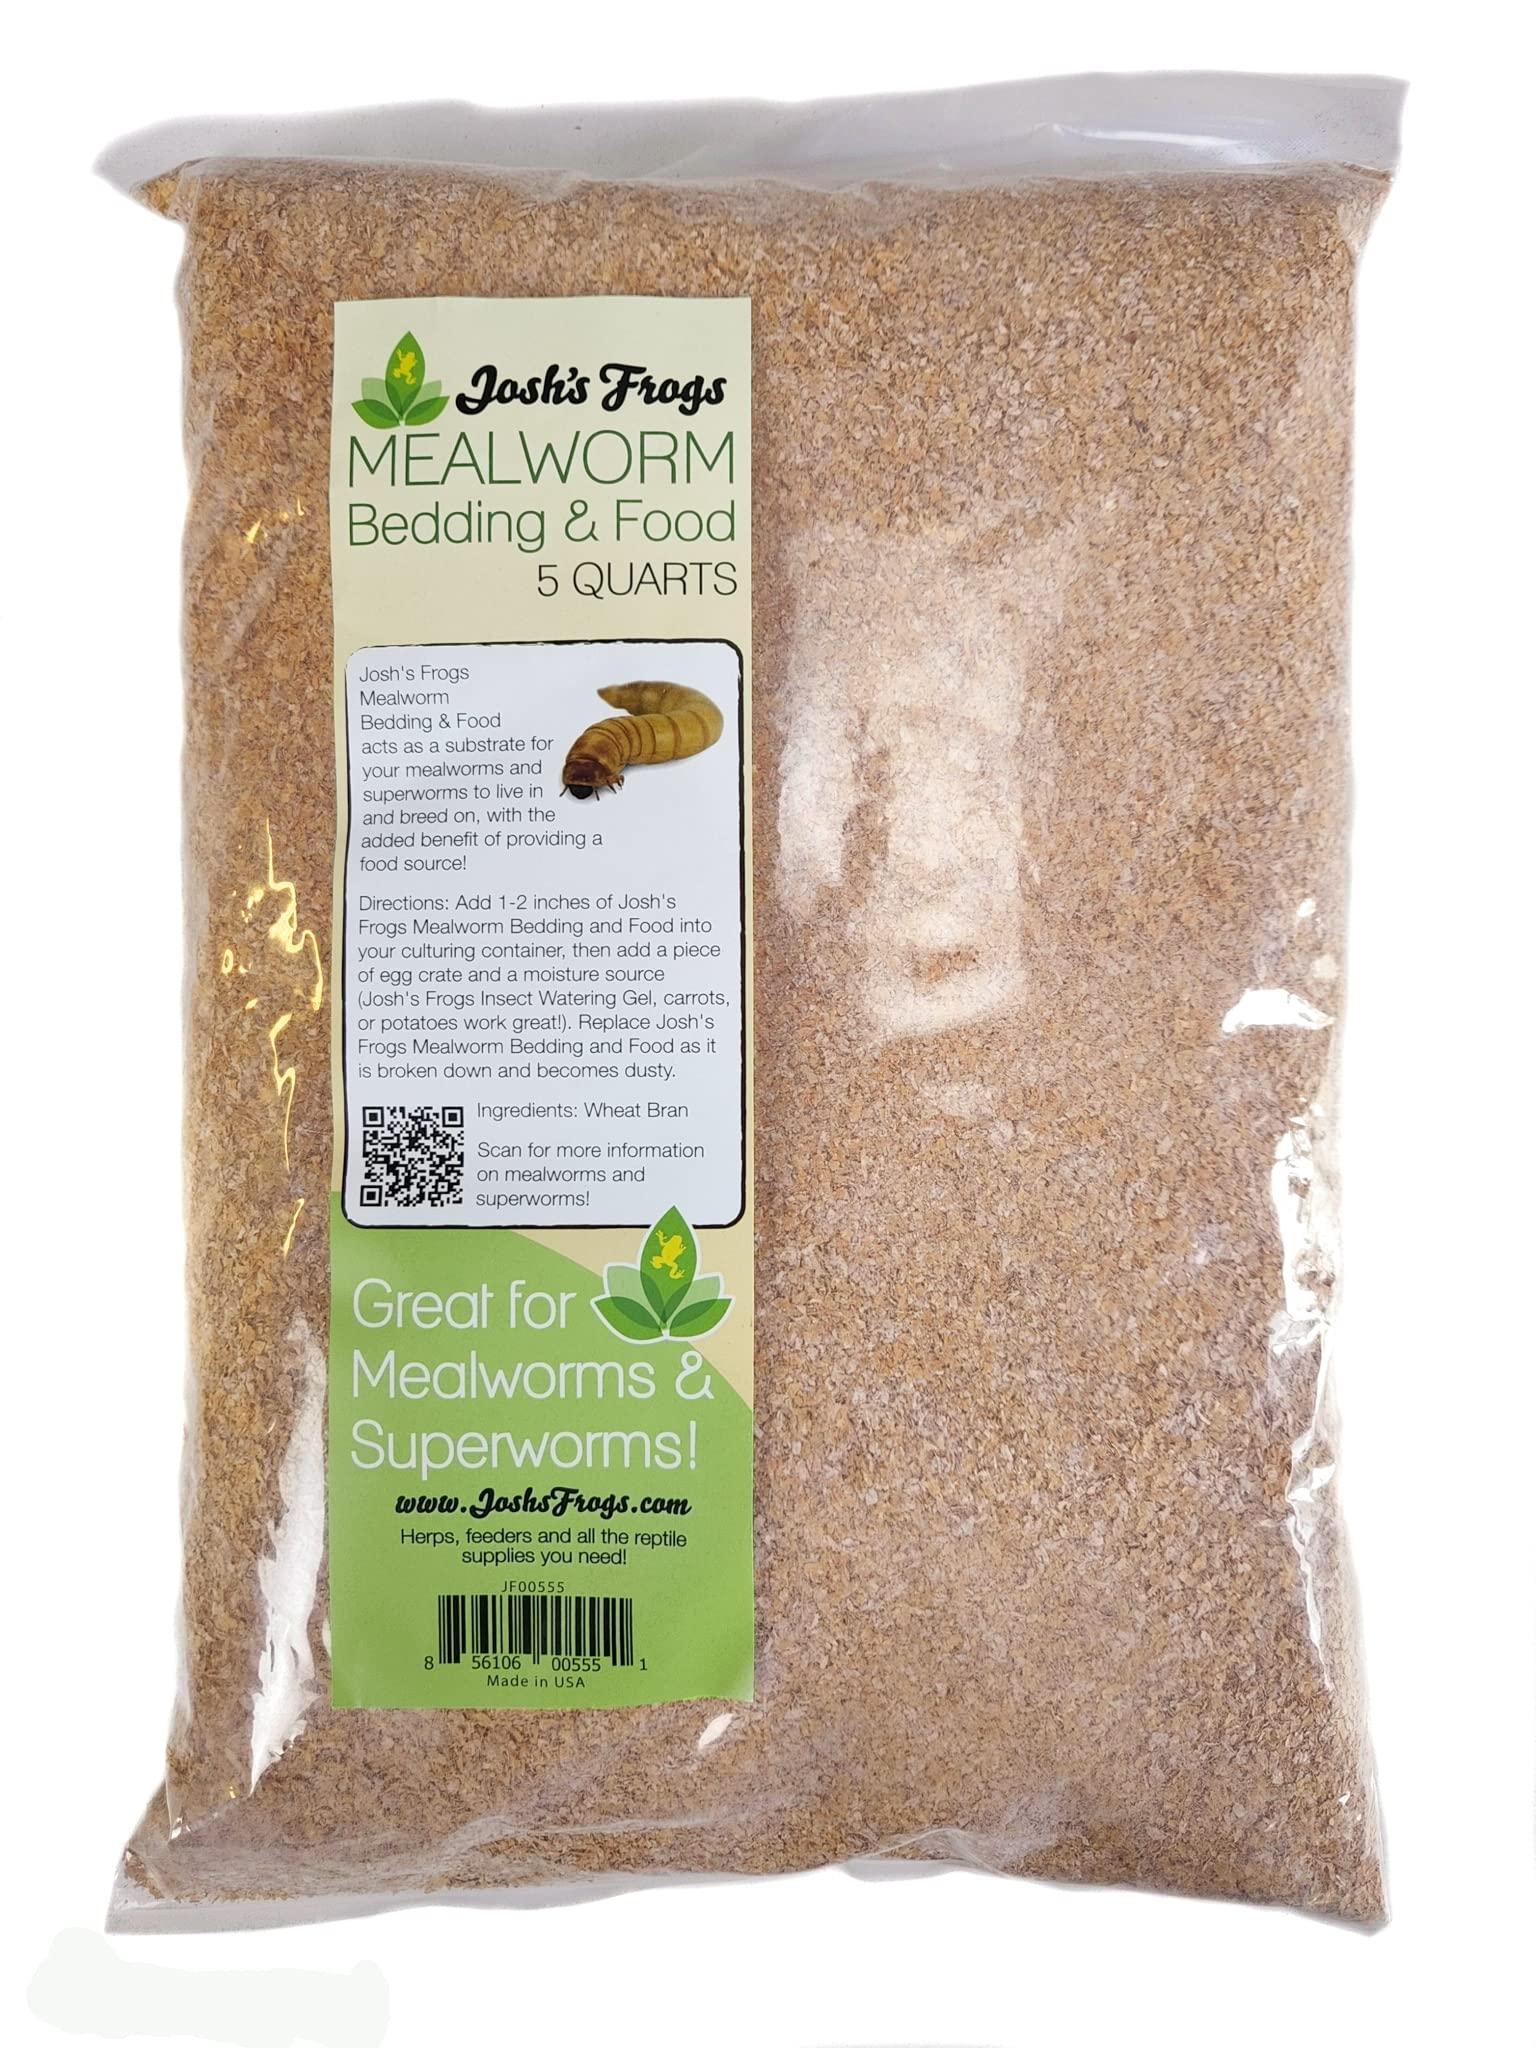 Joshs Frogs Mealworm Superworm Wheat Bran Bedding and Food Source (5 Quarts)